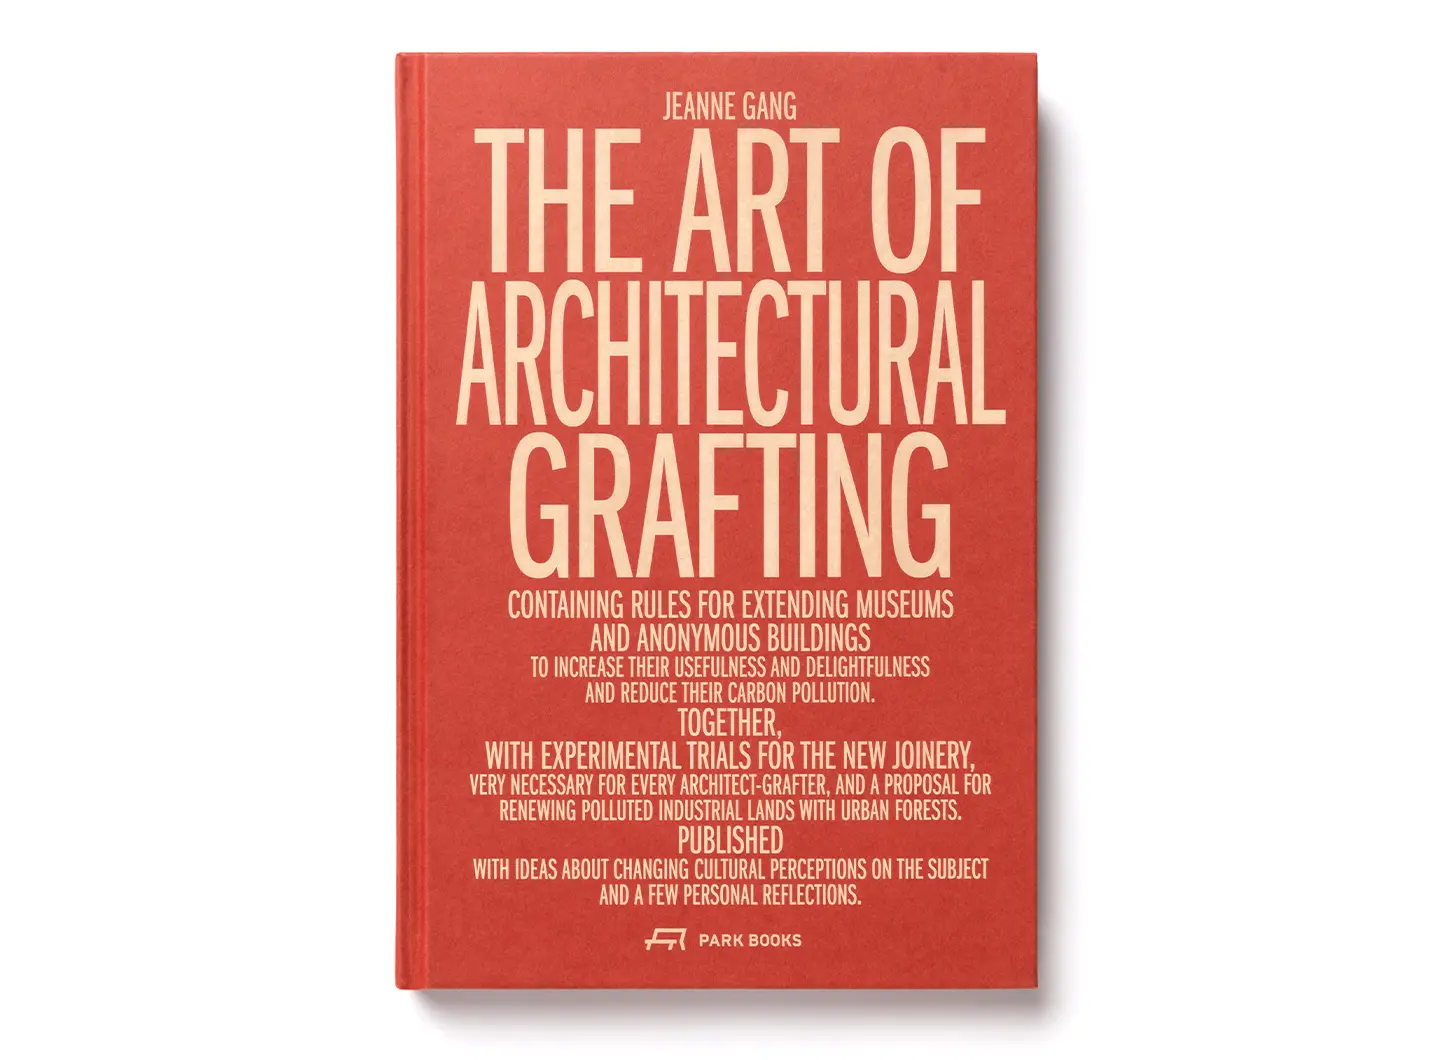 salonemilano, The Art of Architectural Grafting